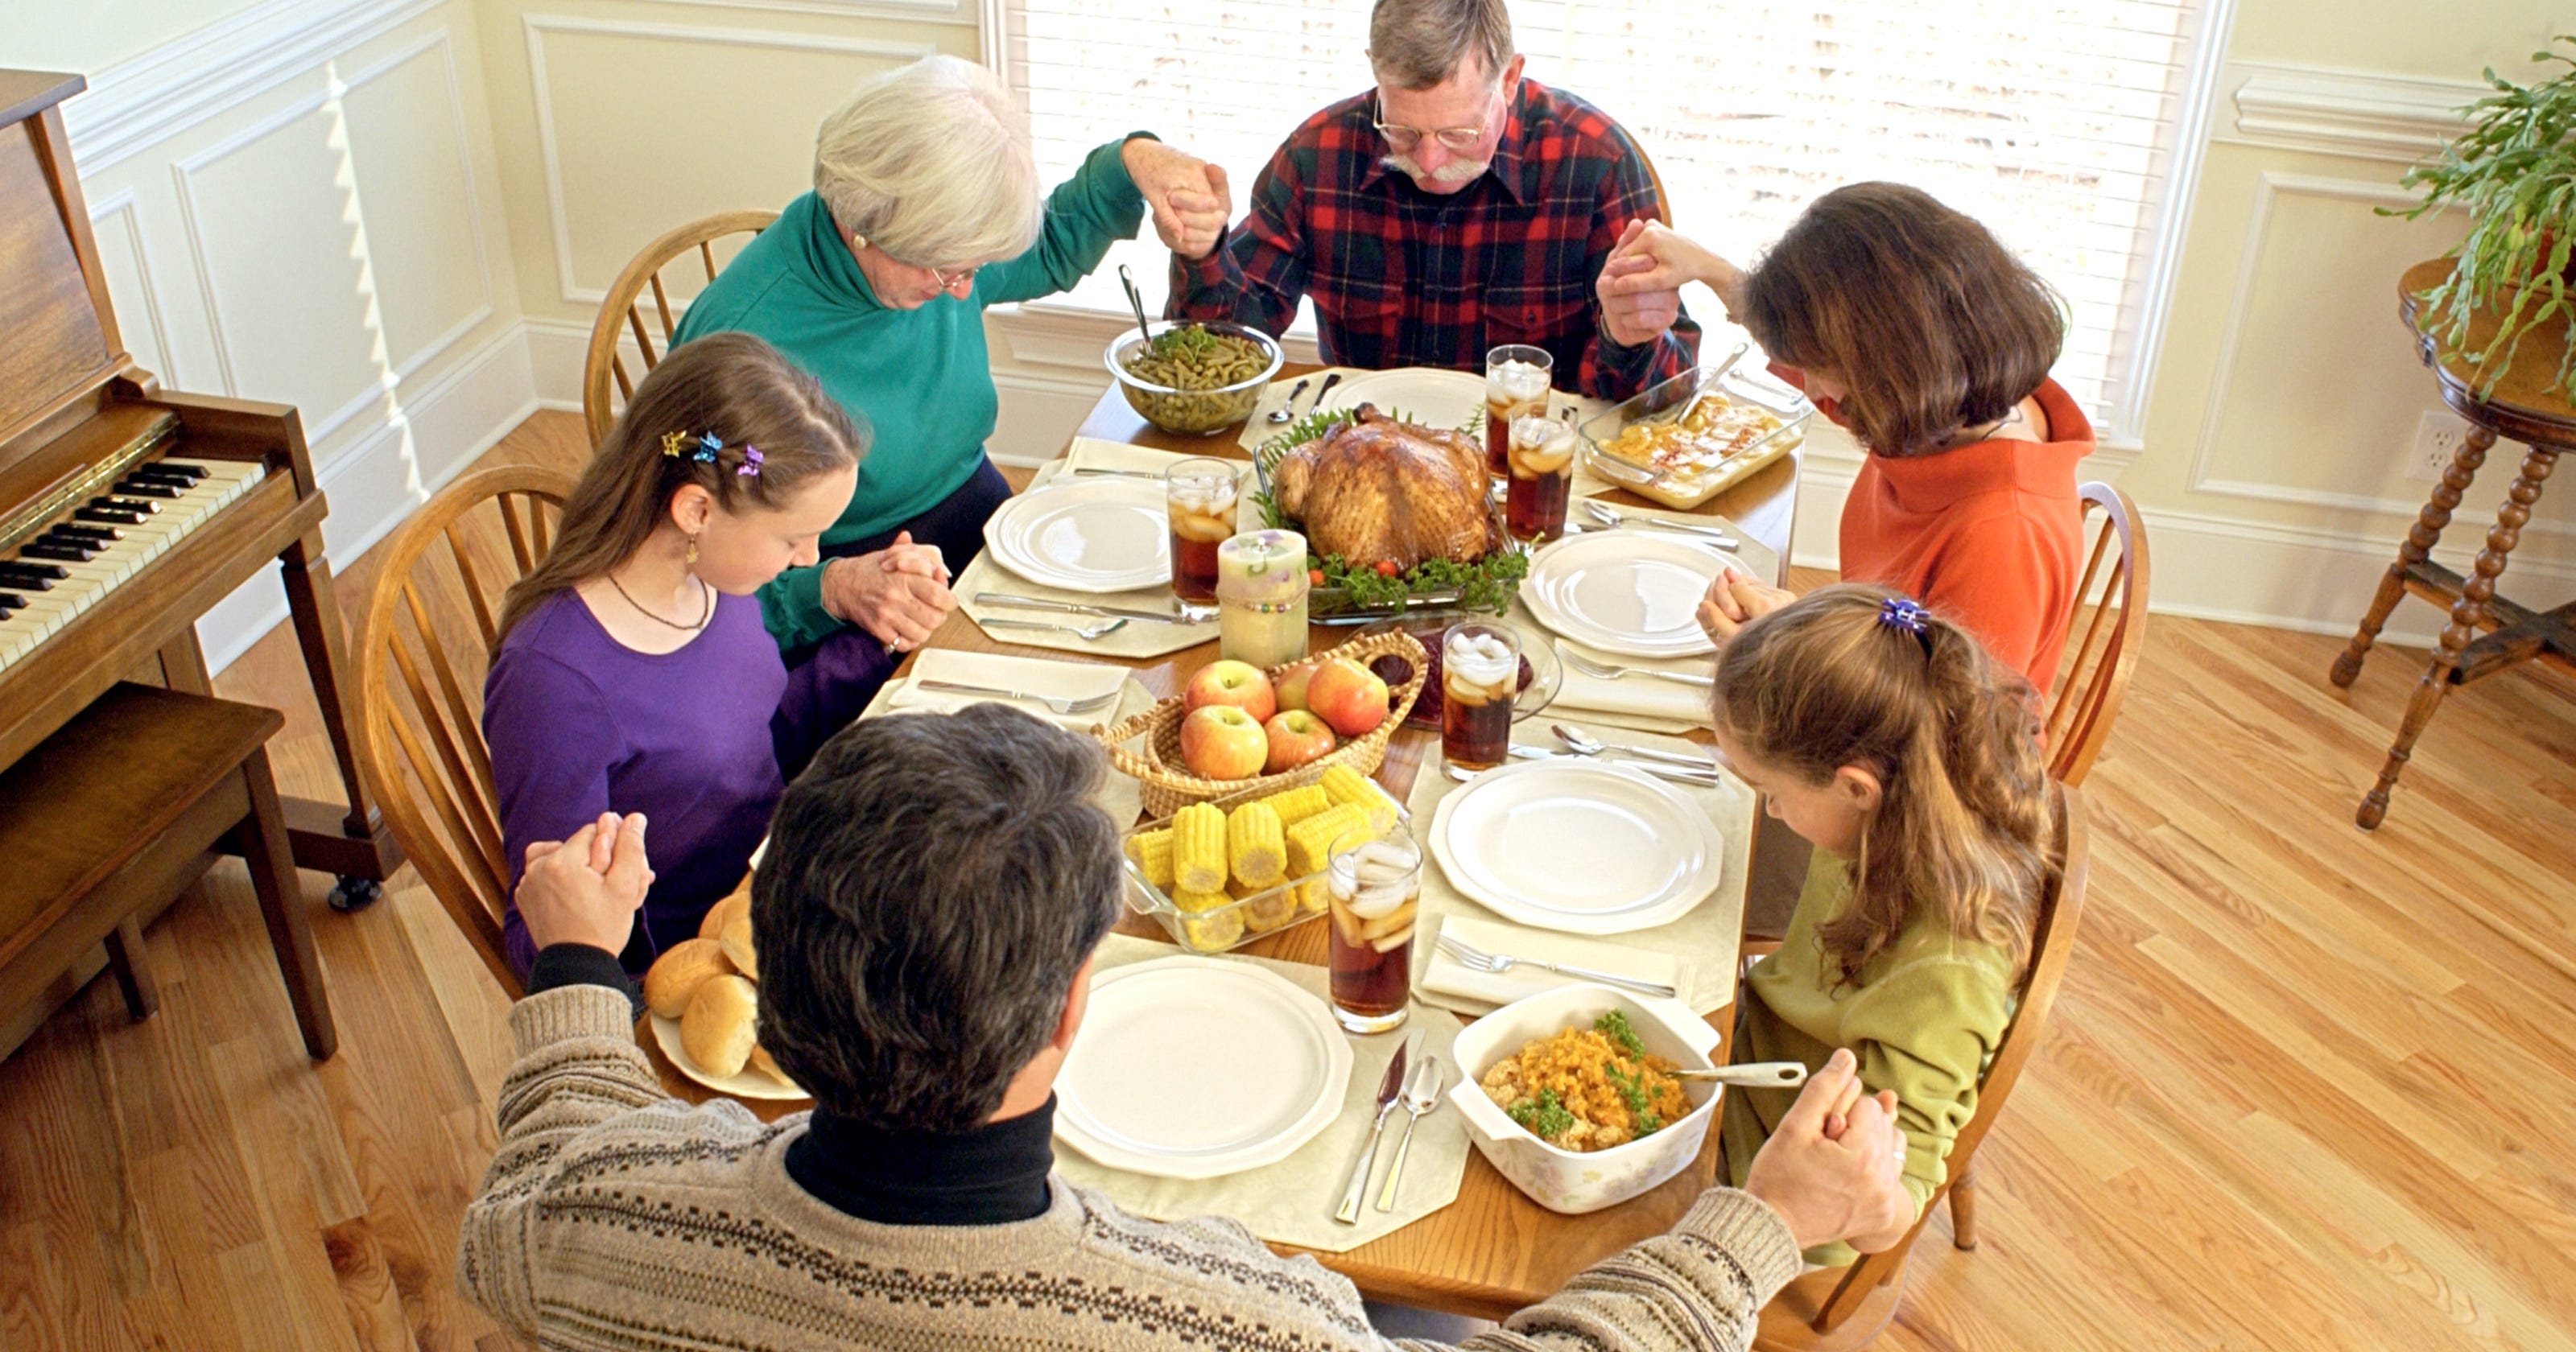 Each family dinner adds up to benefits for adolescents